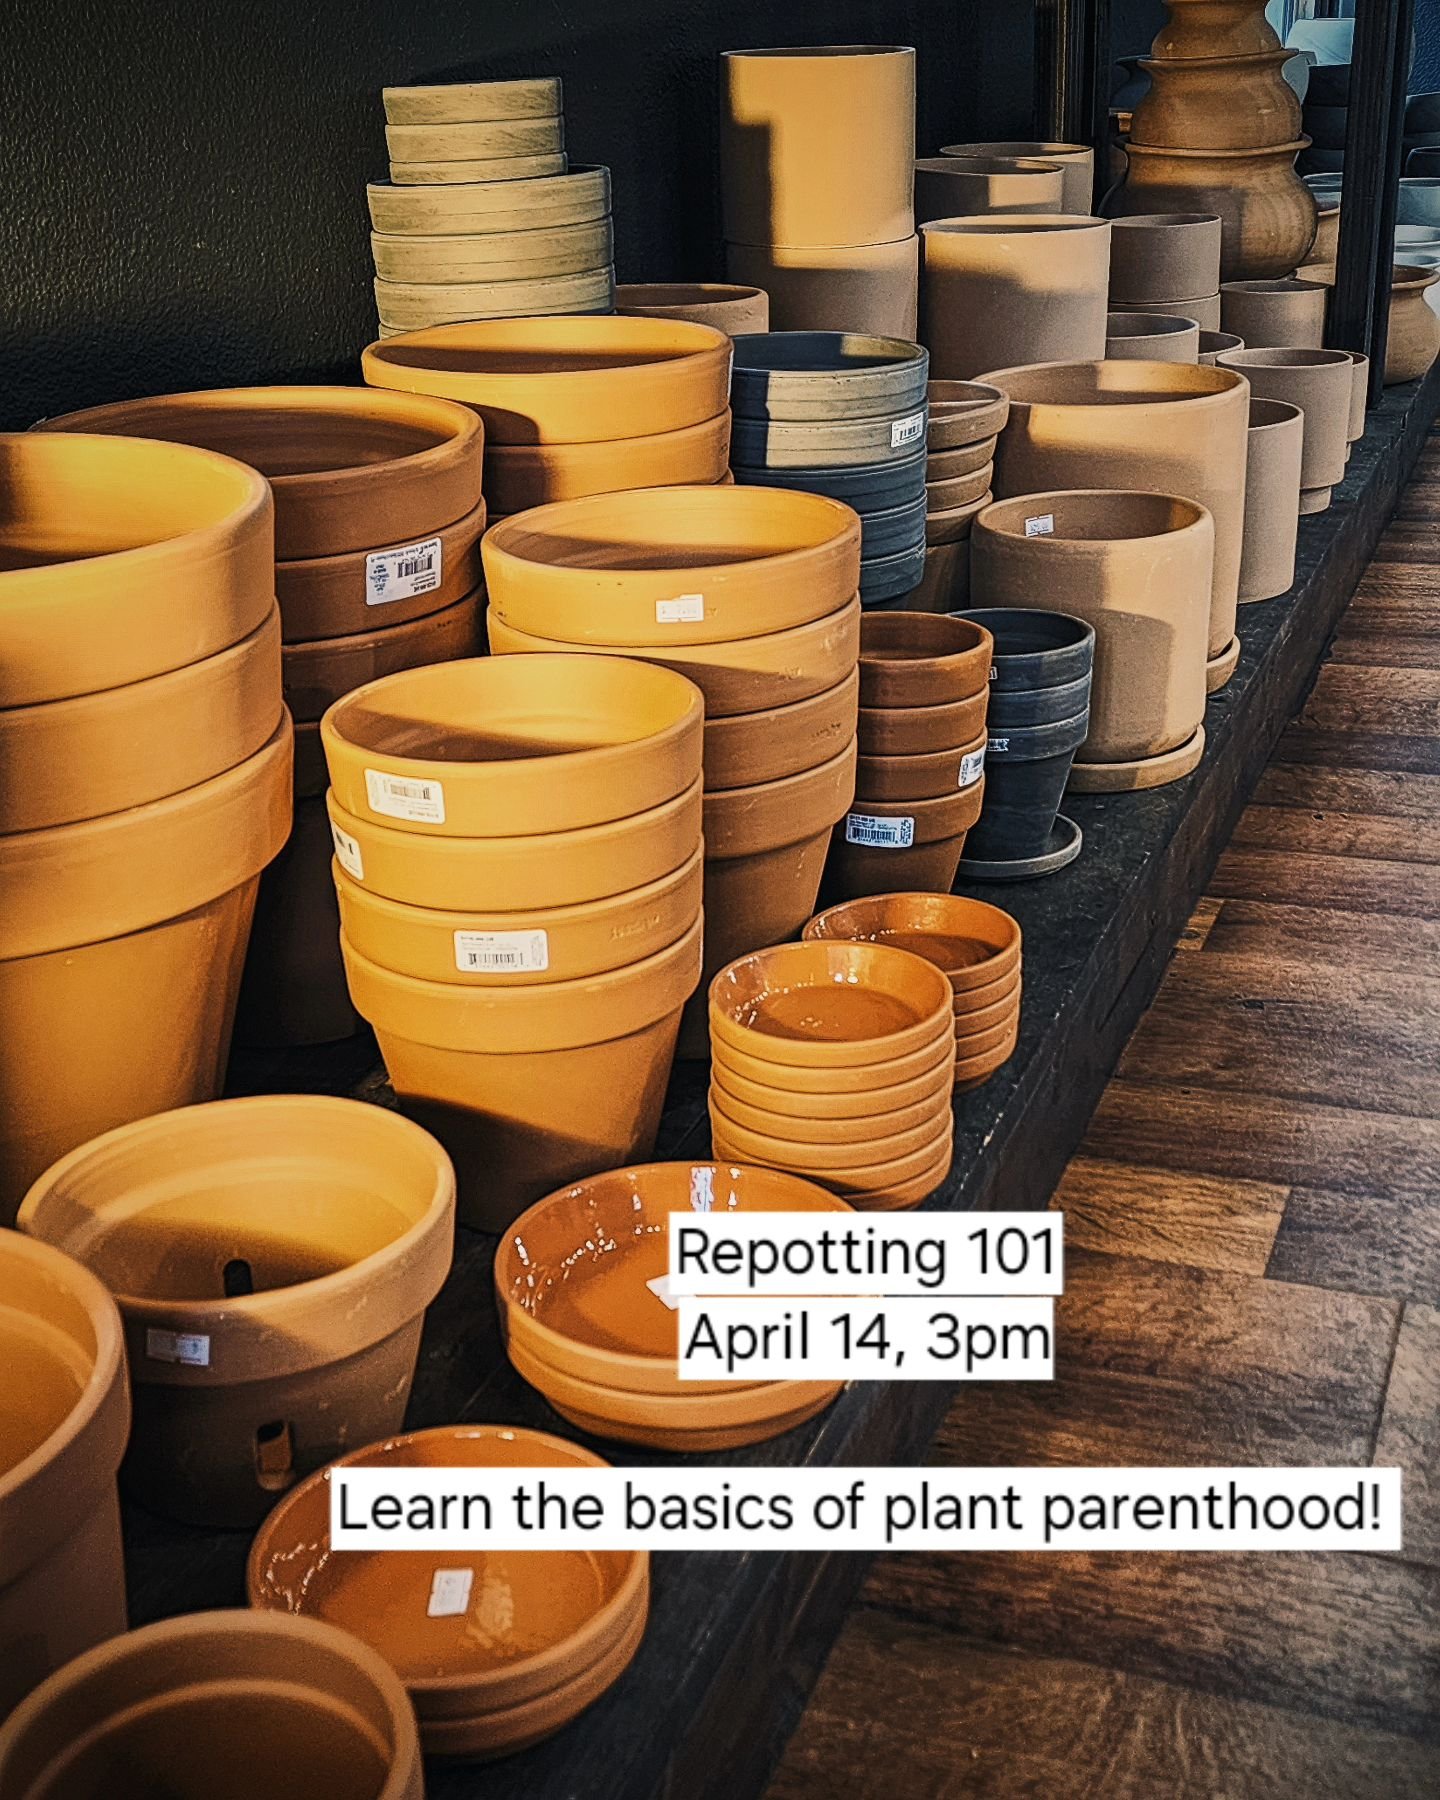 Our next workshop is up and selling quickly! Come learn about basic soil types, pottery types, pests, and repotting! One of STG's most popular workshops to date.